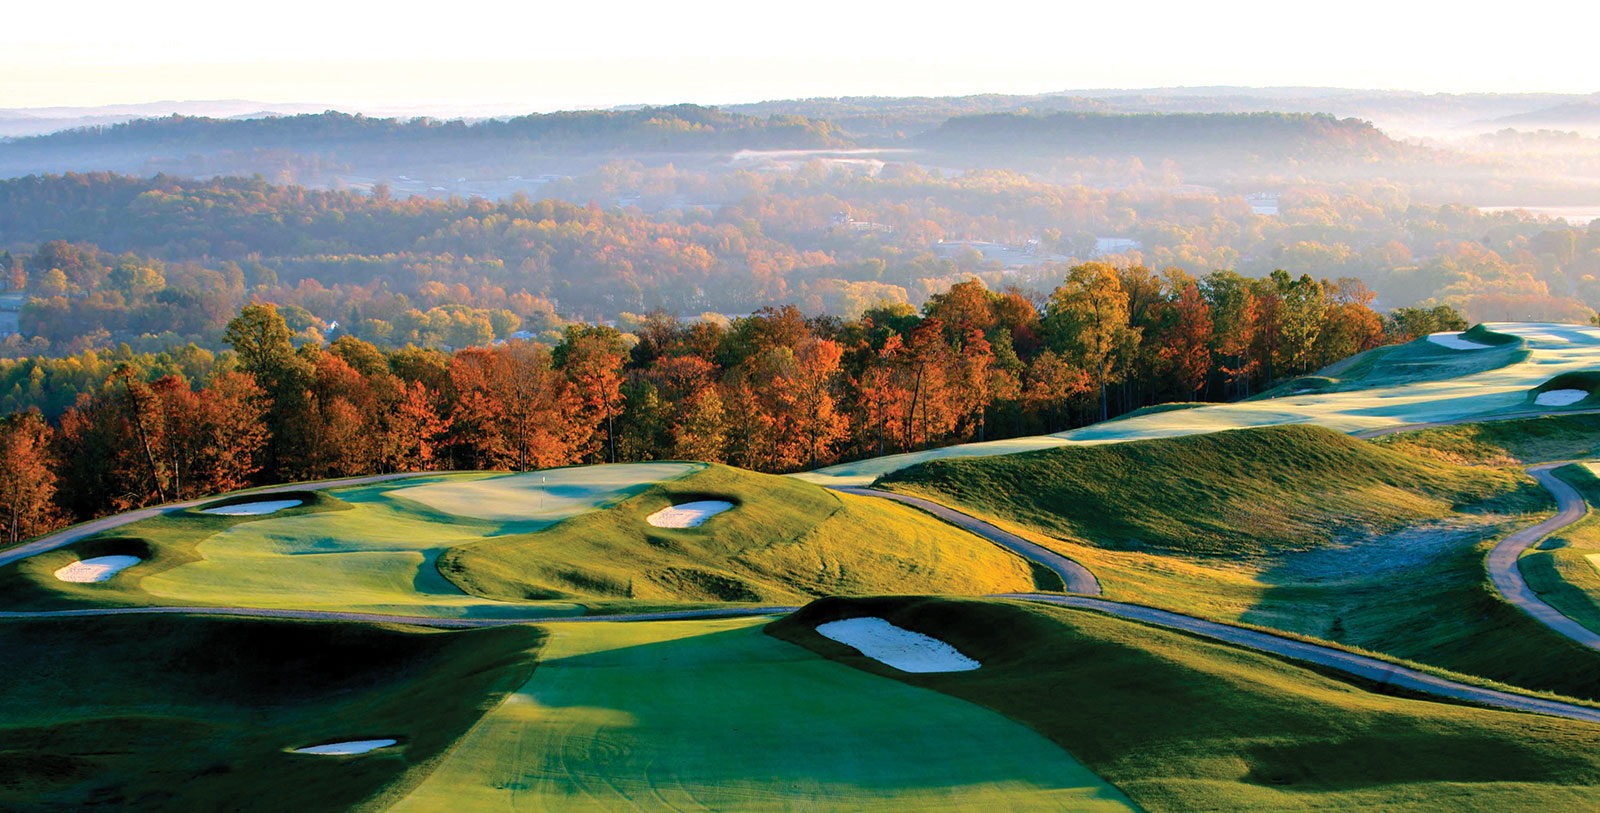 Experience an unforgettable game of golf at the three golf courses at West Baden Springs and nearby French Lick Springs.